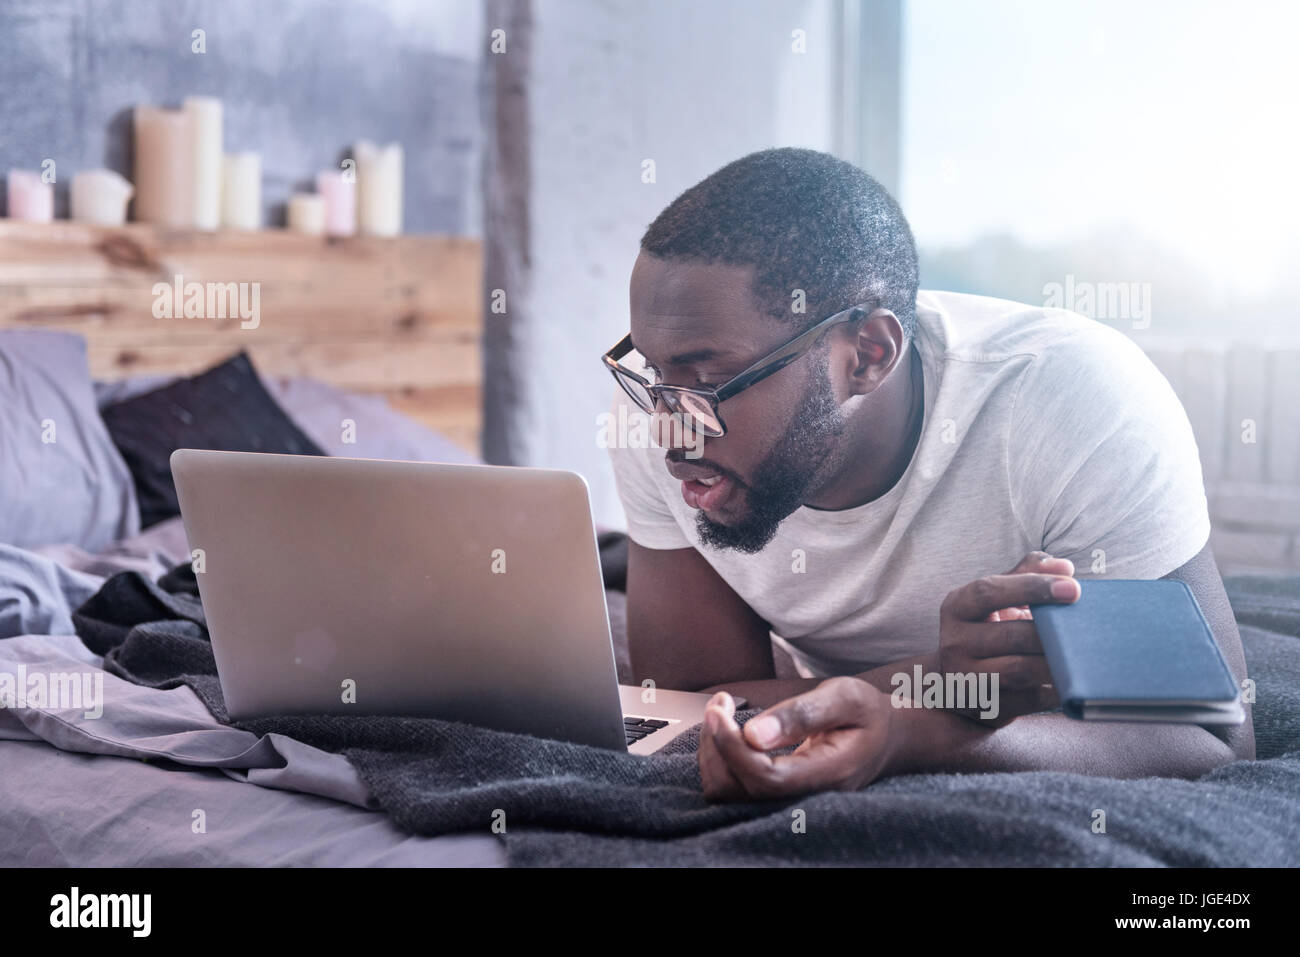 Enthusiastic young African American using laptop at home Stock Photo